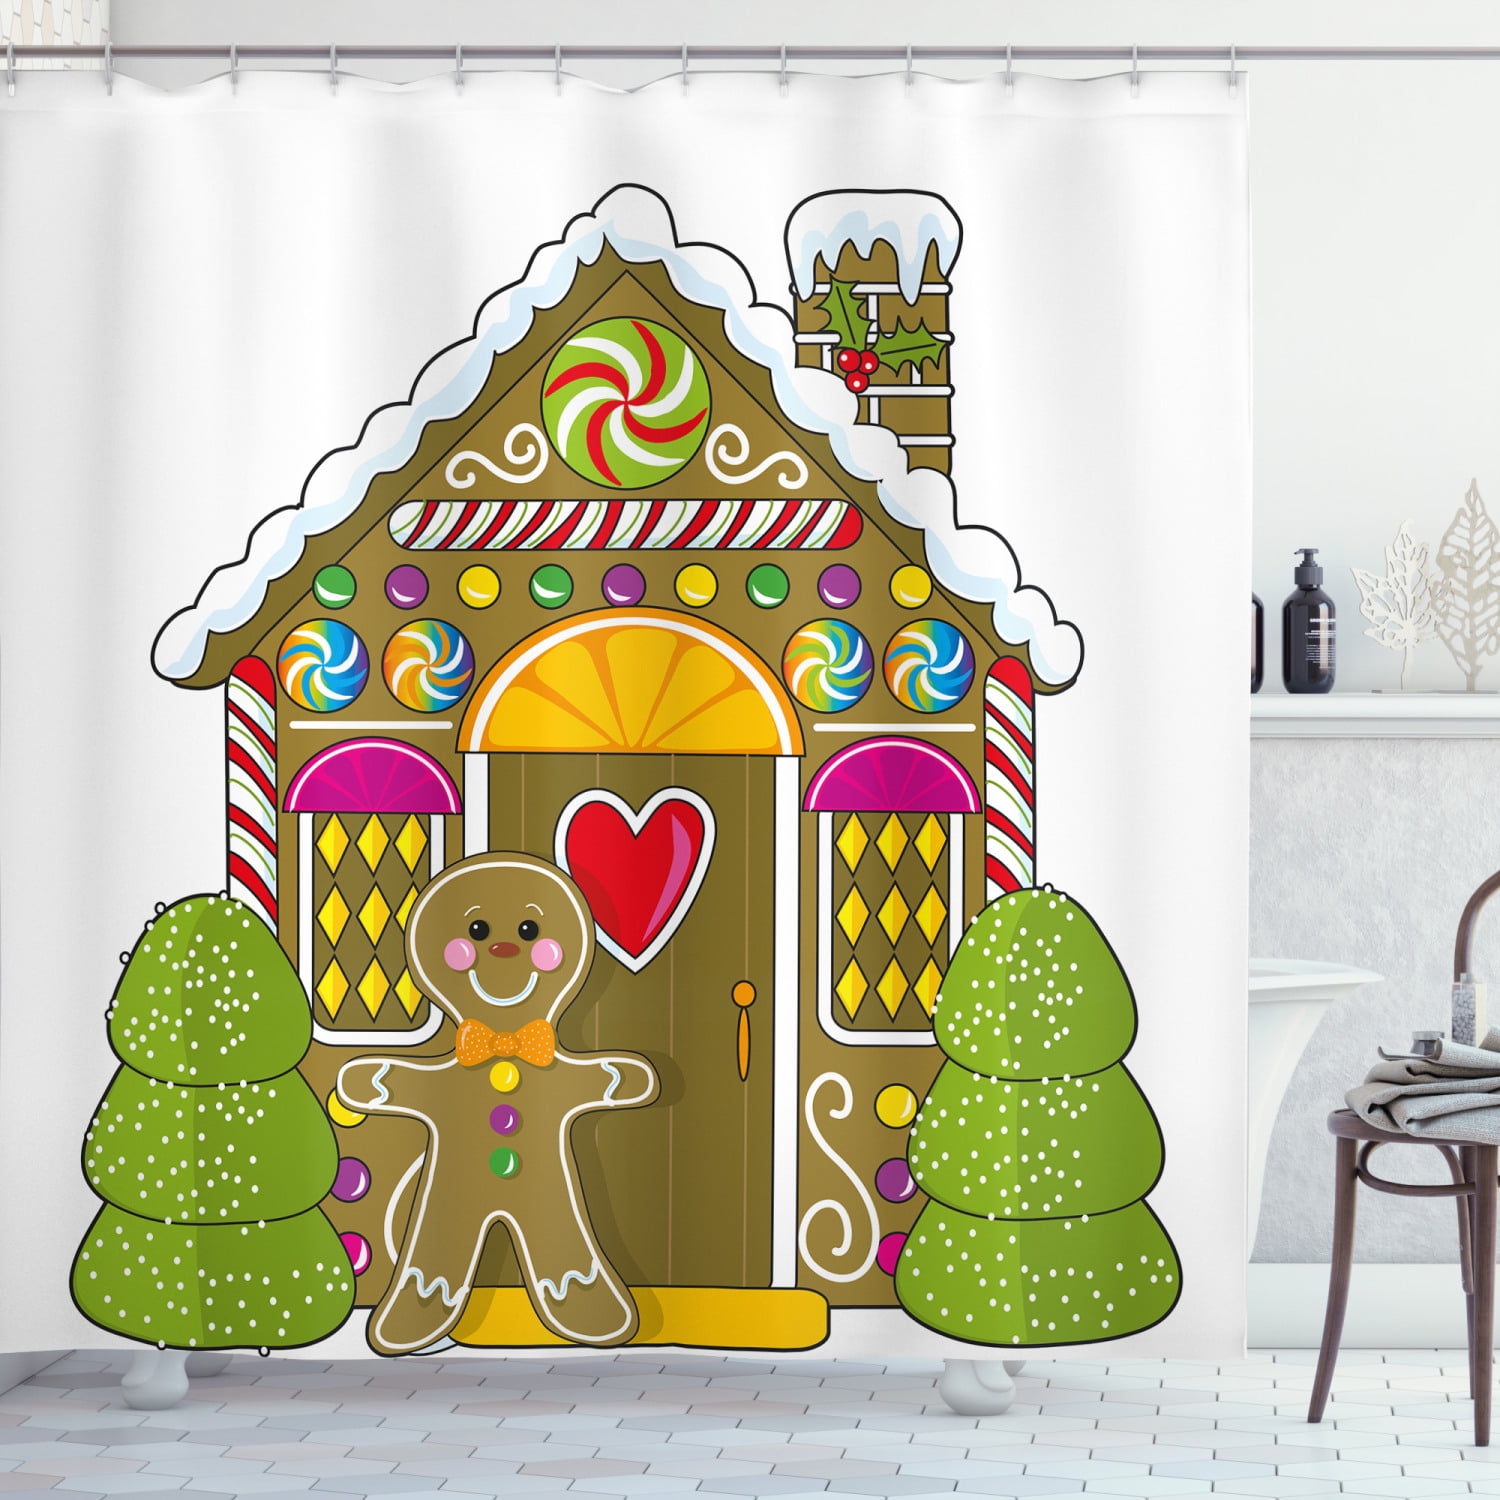 Christmas cookies gingerbread man and girl Shower Curtain Bathroom With 12hooks 